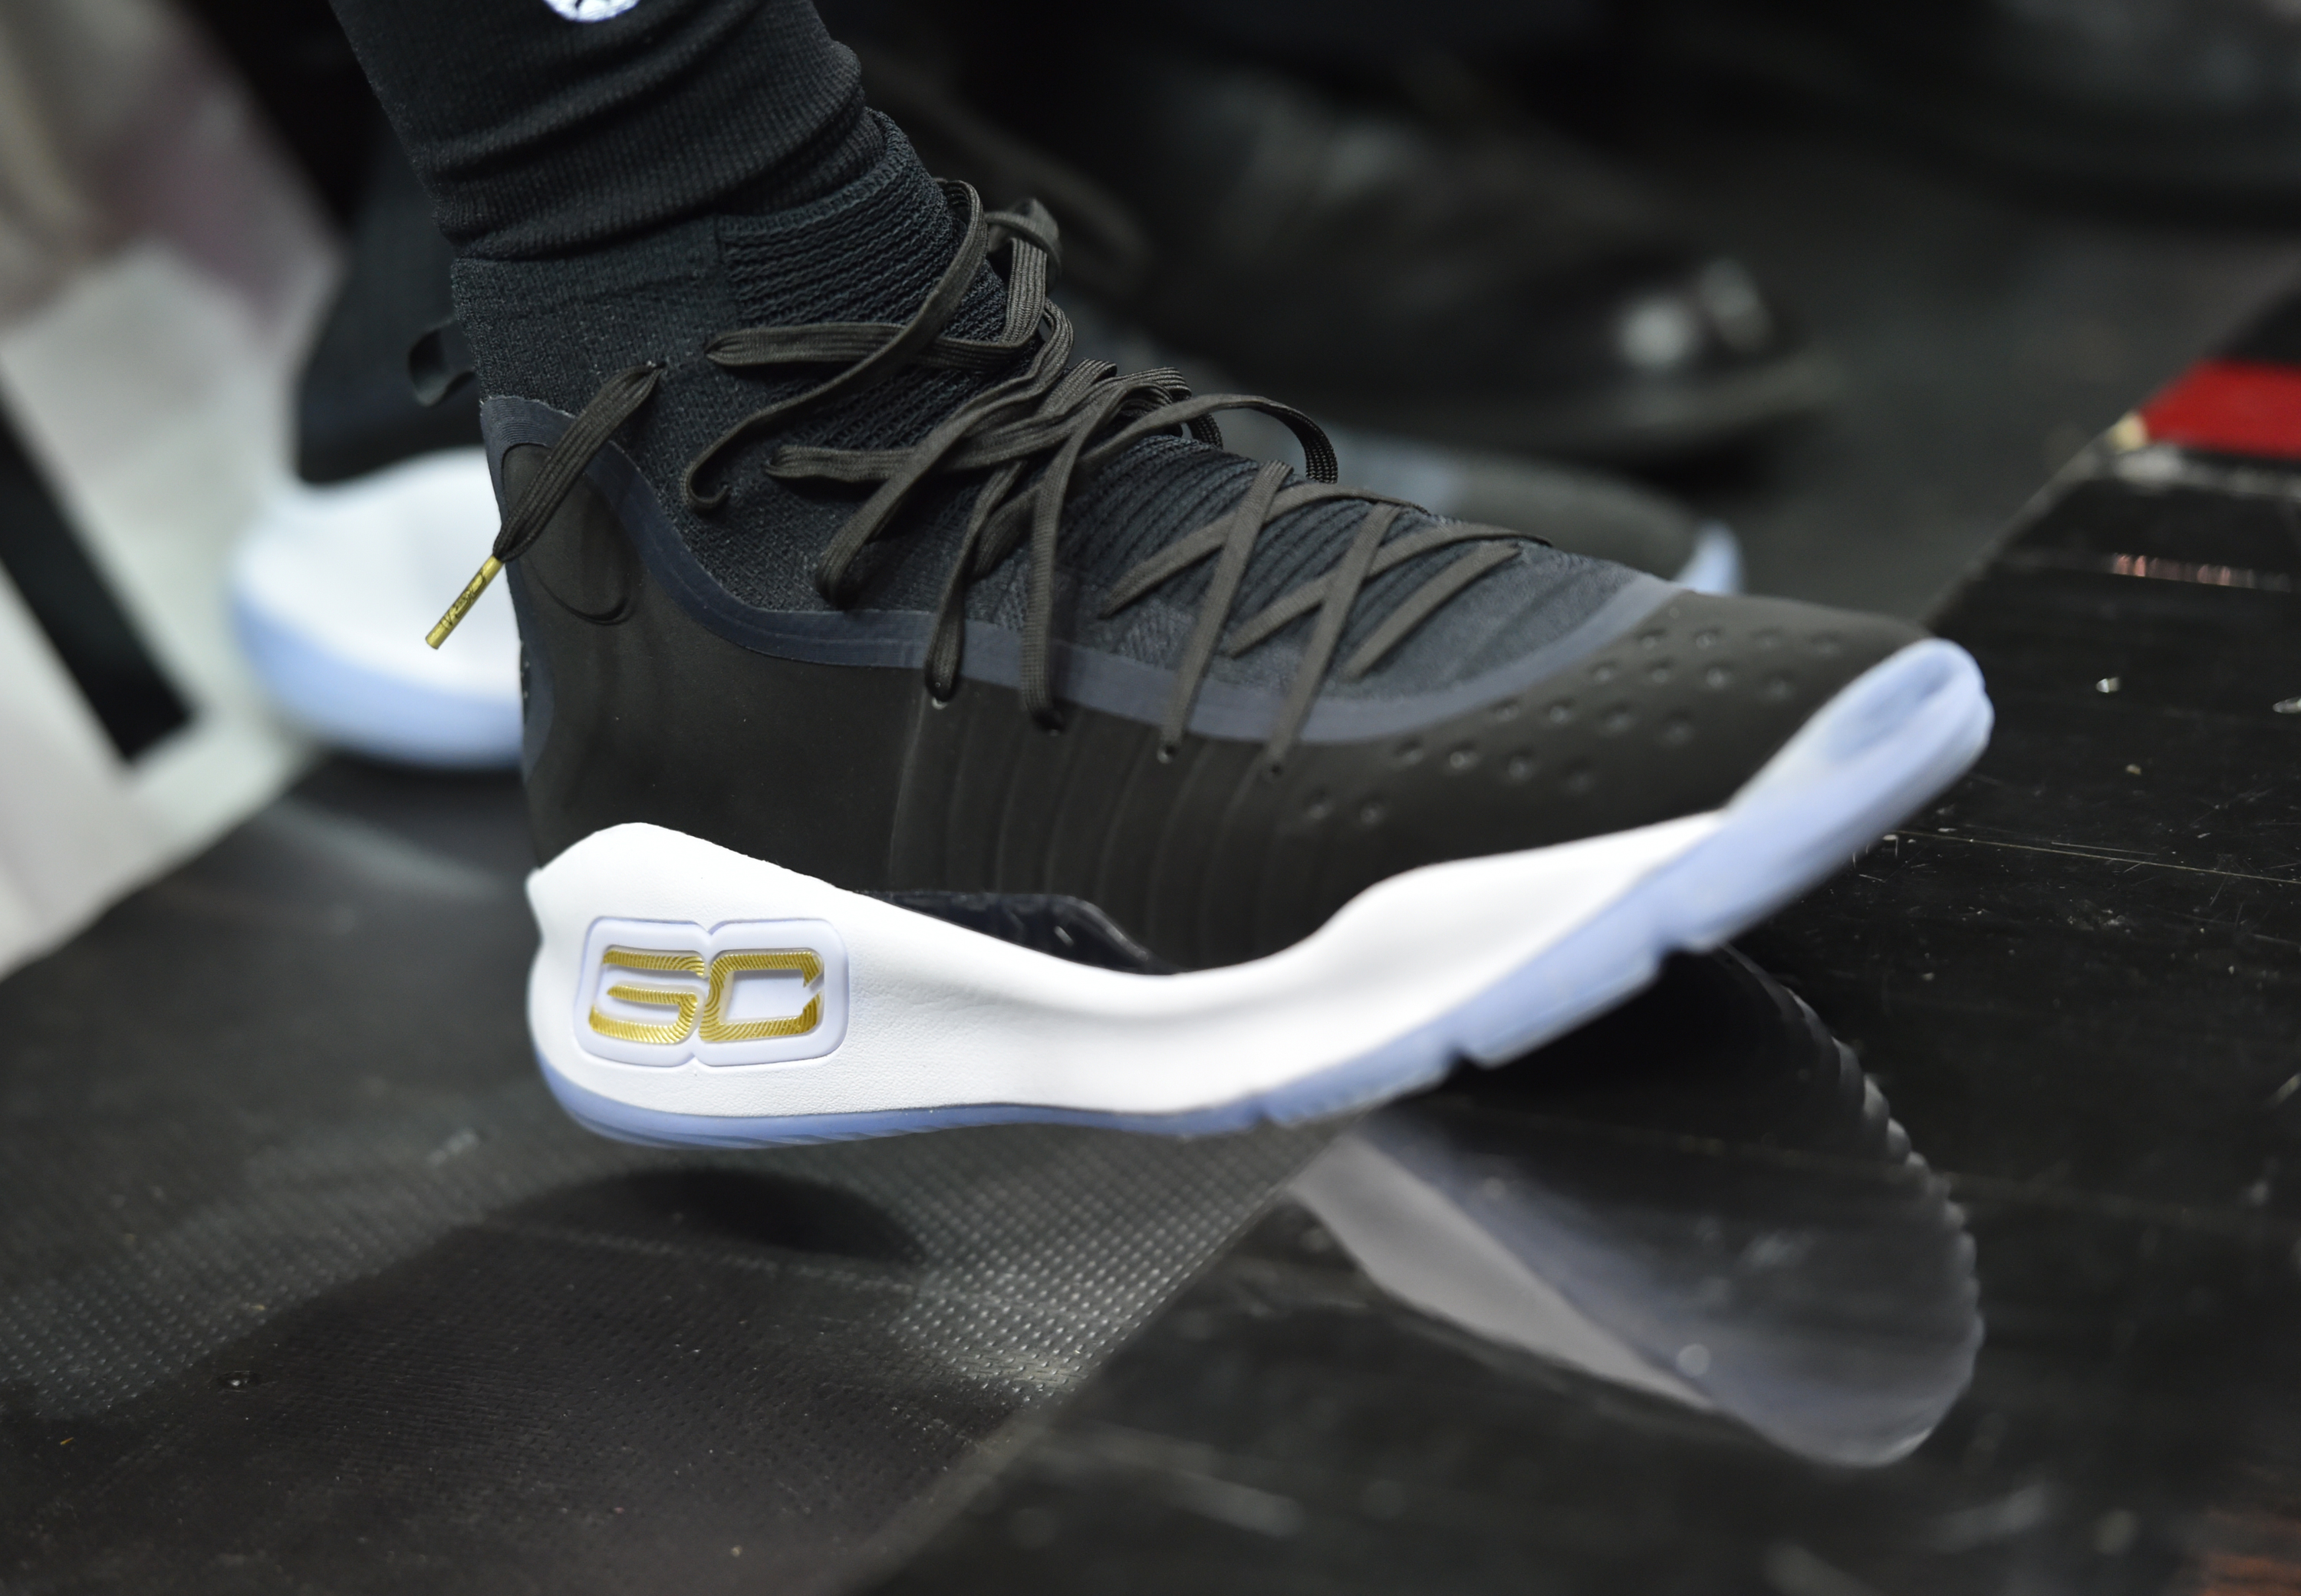 curry 4 shoes